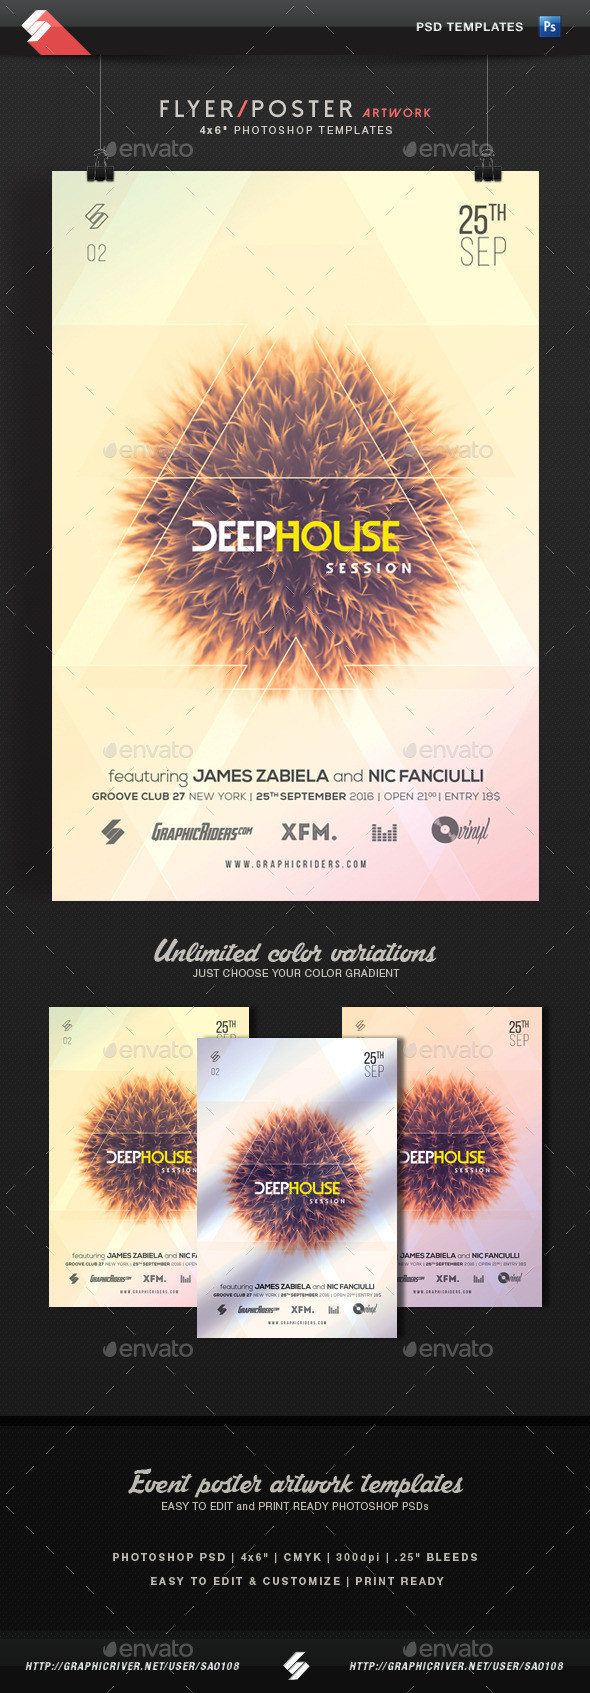 Deephouse session2 flyer template preview